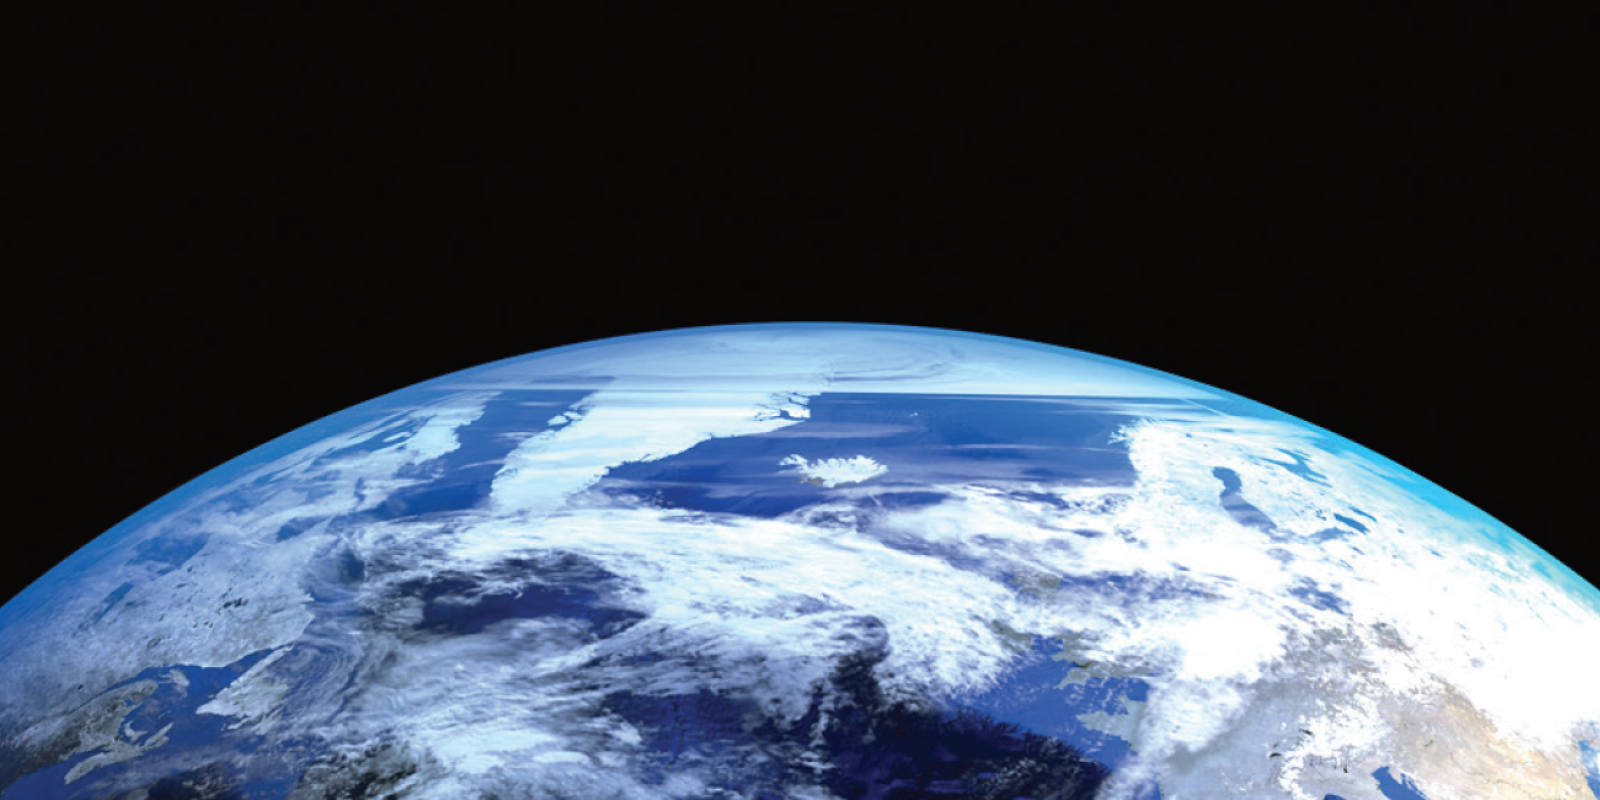 Image of the earth from the book's cover